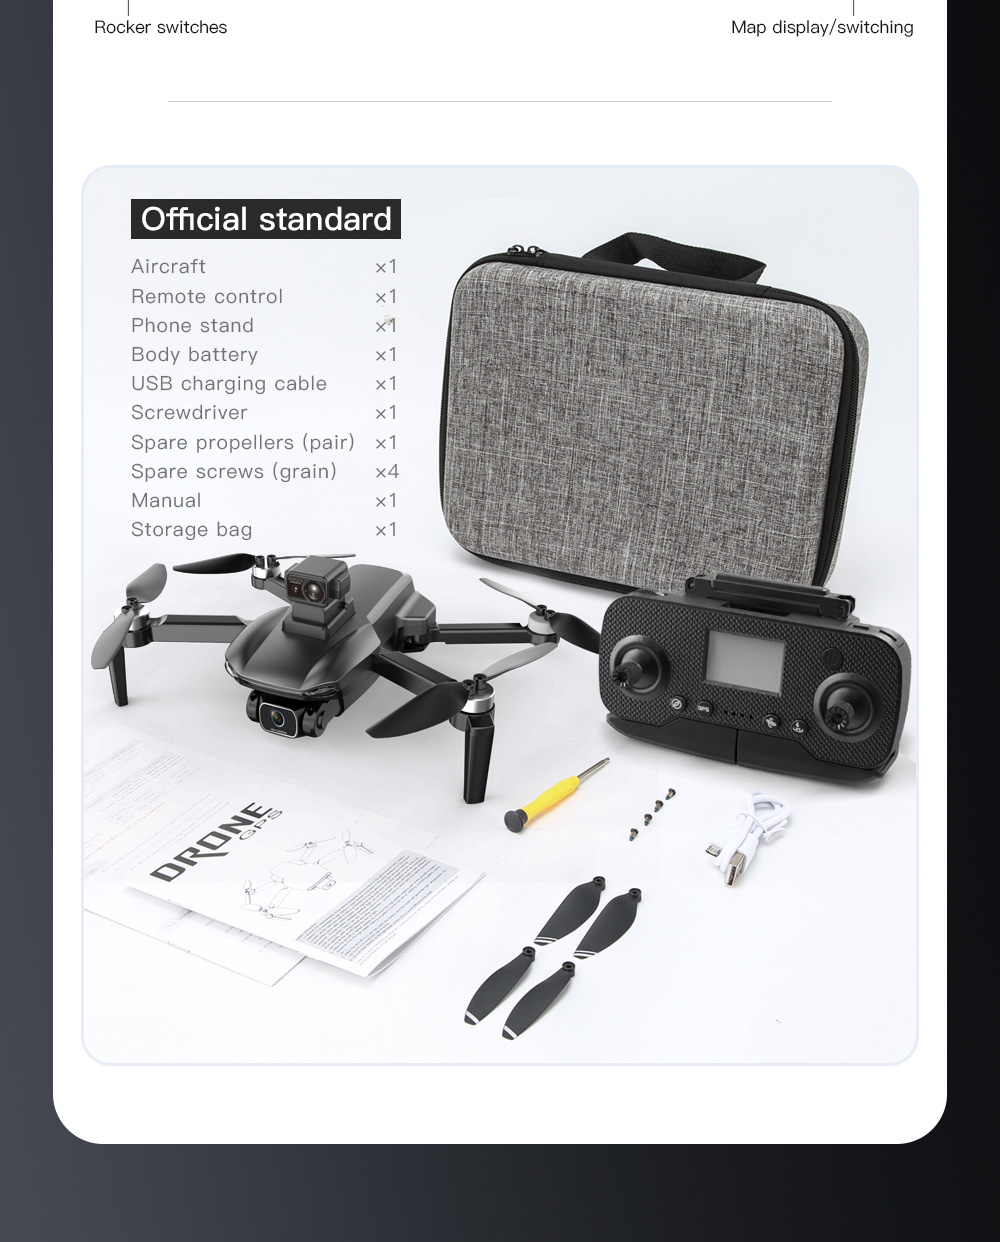 ZLL SG108MAX RC Drone GPS GLONASS 4K@25fps Adjustable Camera with Avoidance 20min Flight Time - Orange One Battery